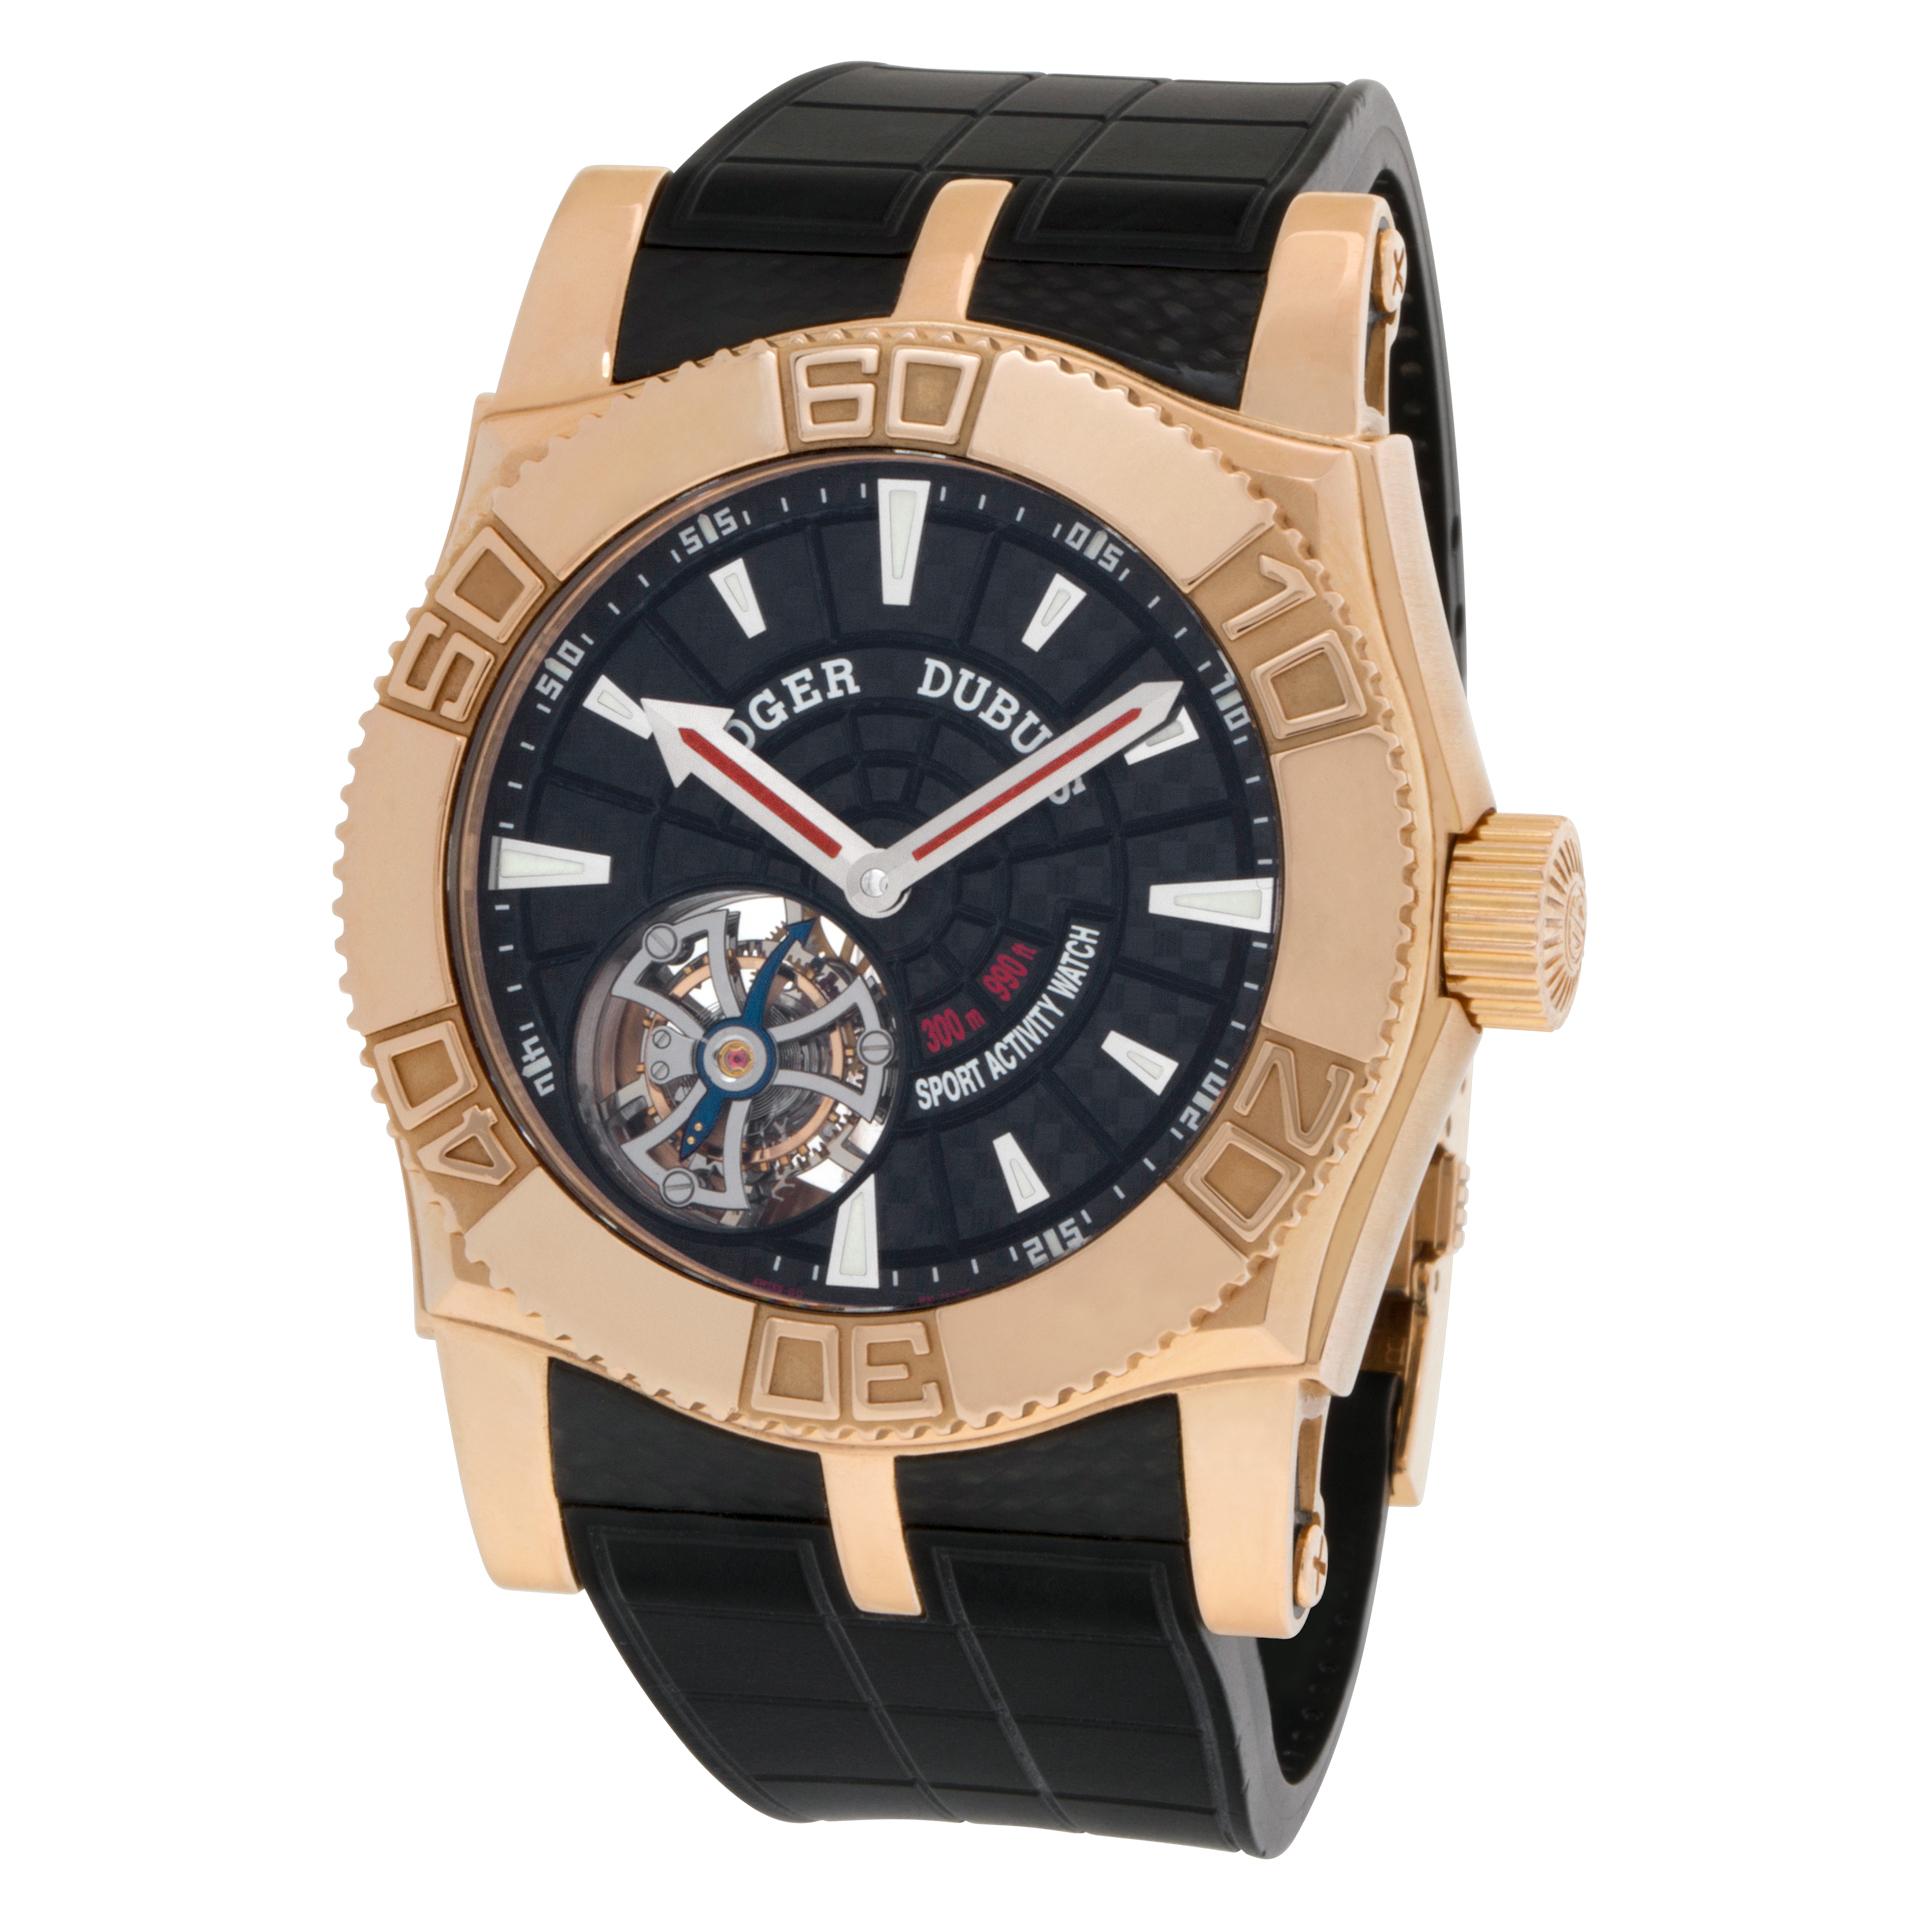 Limited Edition Roger Dubuis Easy Diver Tourbillon in 18k rose gold on a rubber strap with 18k rose gold deployant buckle. Manual wind movement under glass w/ tourbillon. Complete with original box. 47 mm case size. Ref SE48 02 5 K9.53. Circa 2010s.